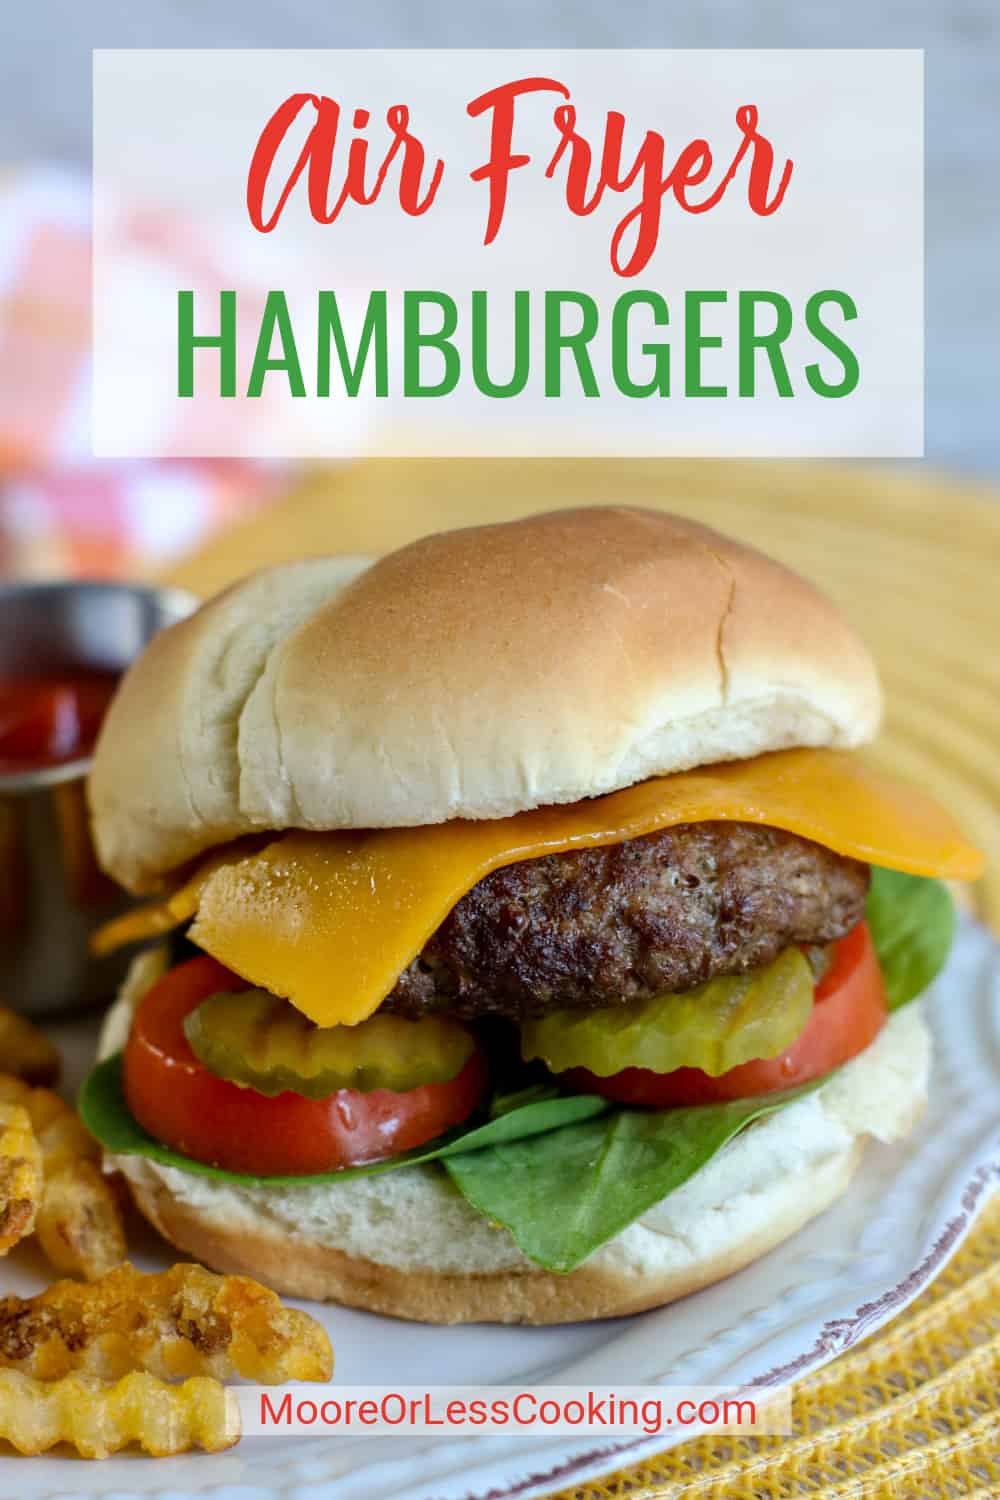 For a fuss-free way to make homemade hamburgers, this easy air fryer recipe has got you covered! This method of cooking delicious and juicy hamburgers is quick and convenient, making it perfect for busy weeknights. via @Mooreorlesscook